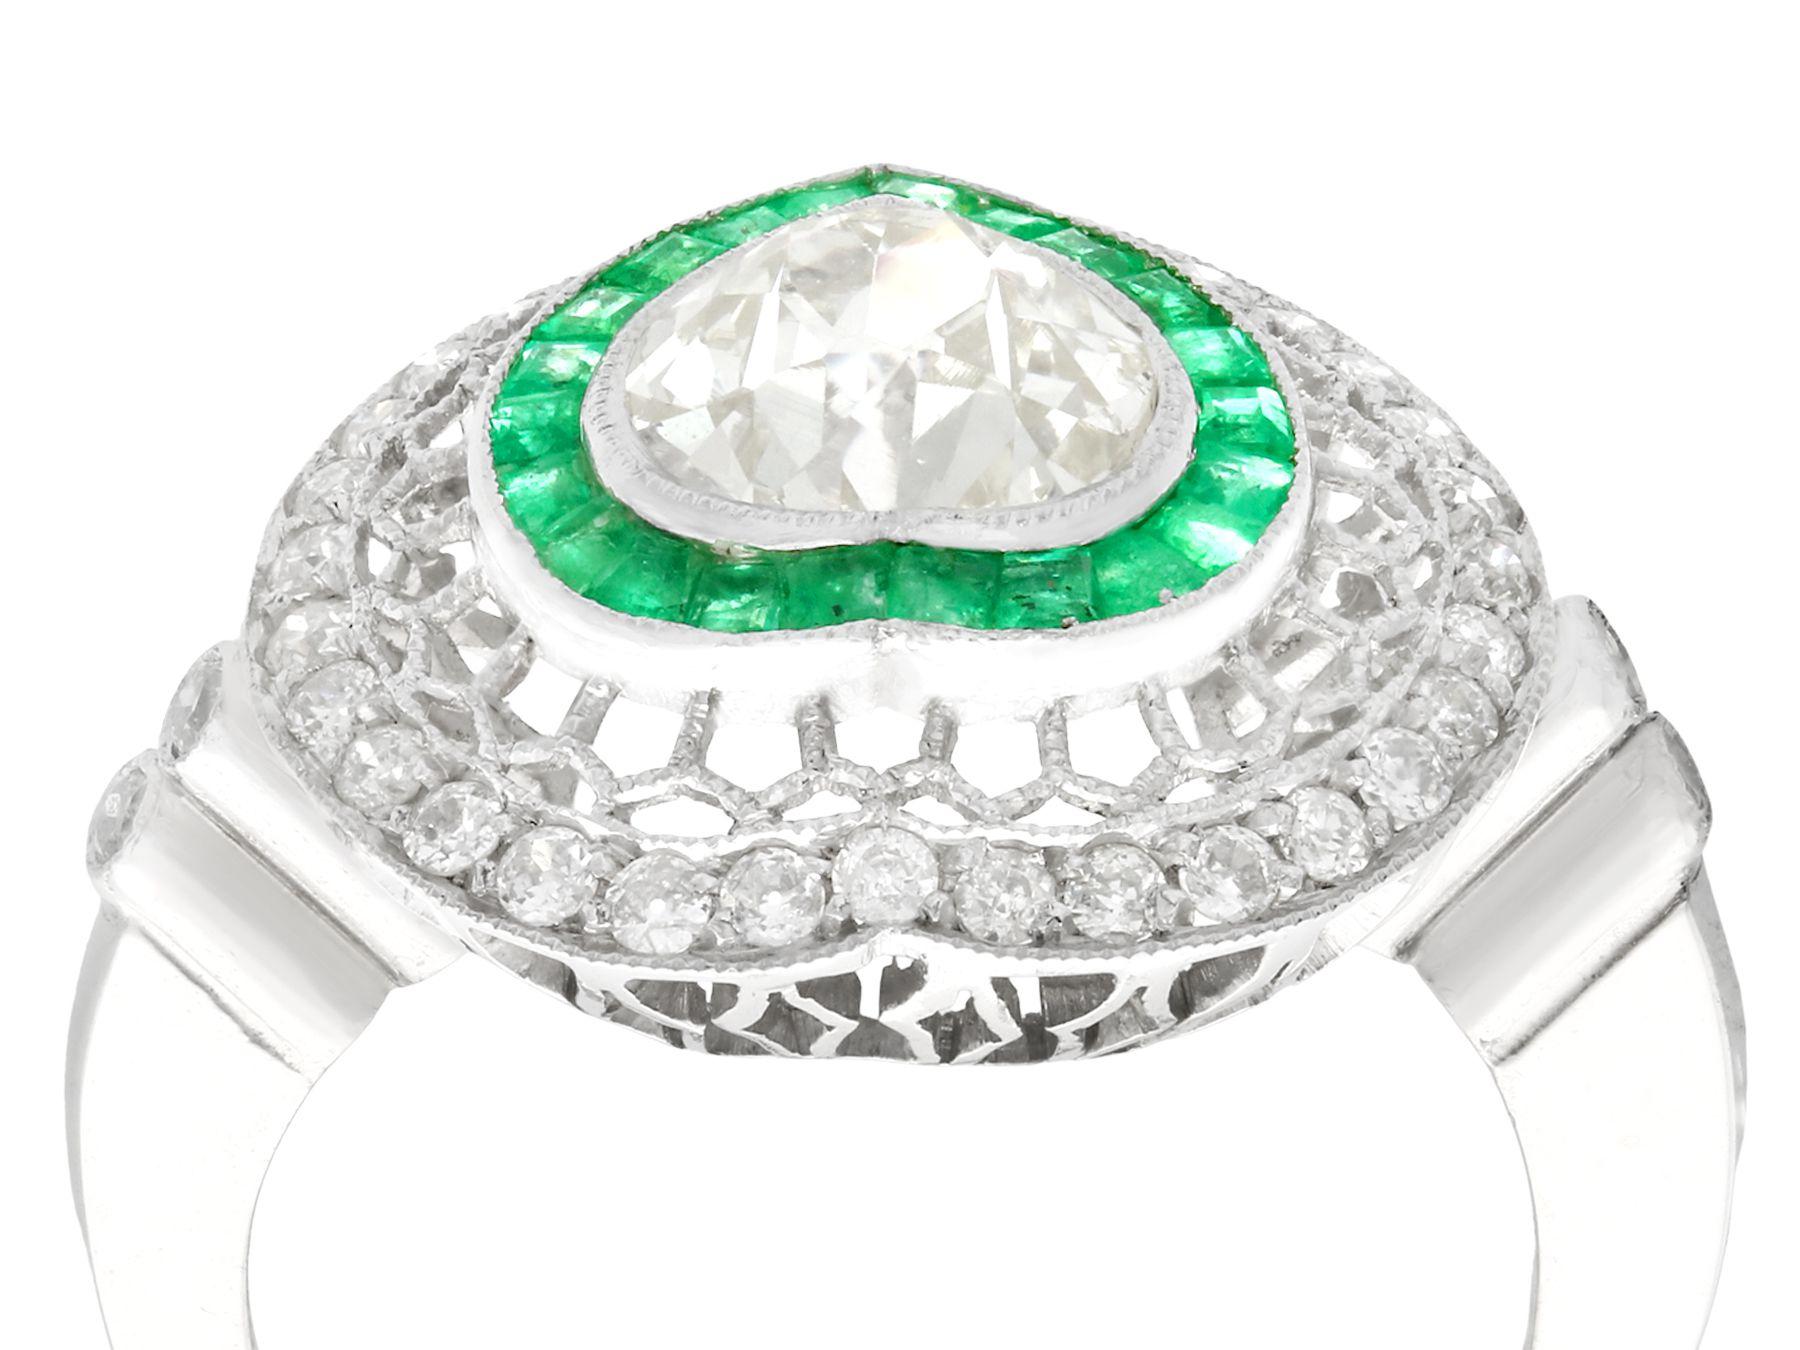 A stunning antique and contemporary 0.68 carat emerald and 2.62 carat diamond, platinum cocktail ring; part of our diverse emerald jewellery and estate jewelry collections.

This stunning, fine and impressive emerald and diamond ring has been